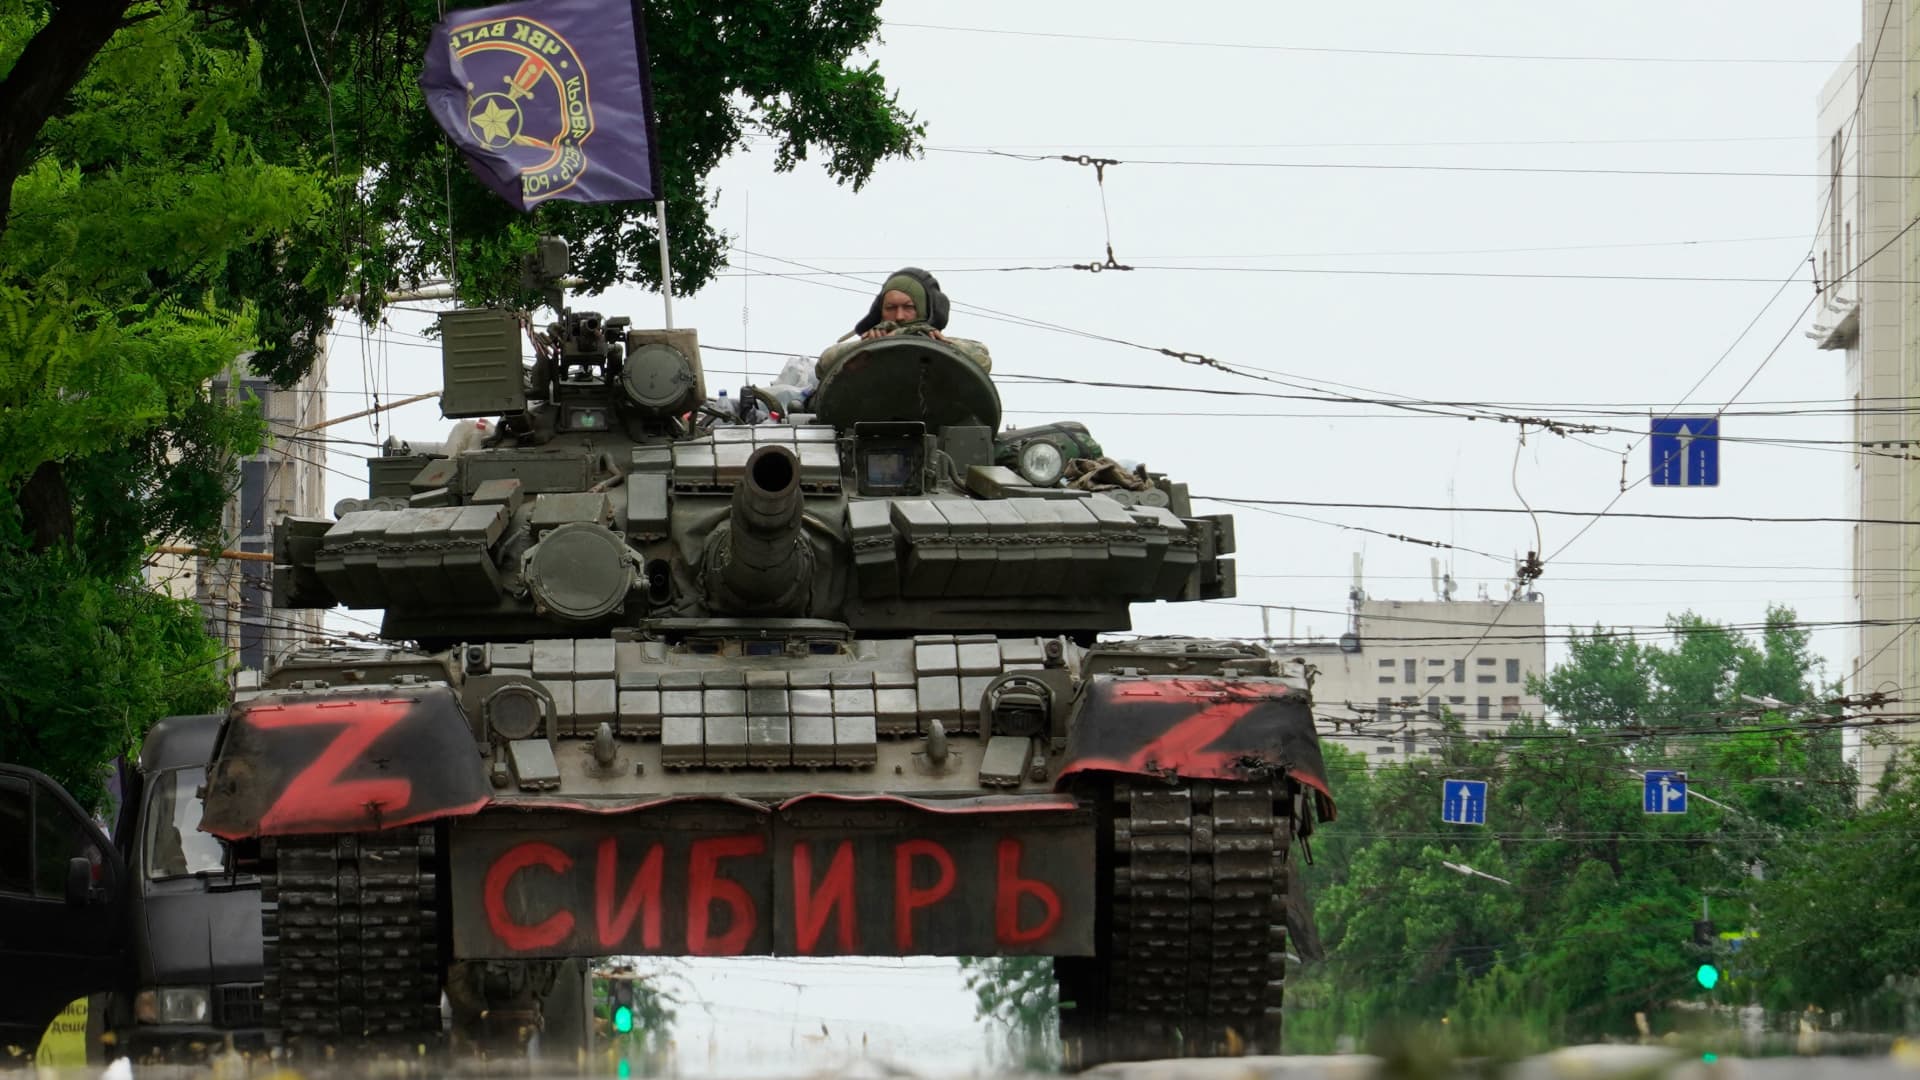 Members of Wagner group sit atop of a tank in a street in the city of Rostov-on-Don, on June 24, 2023.